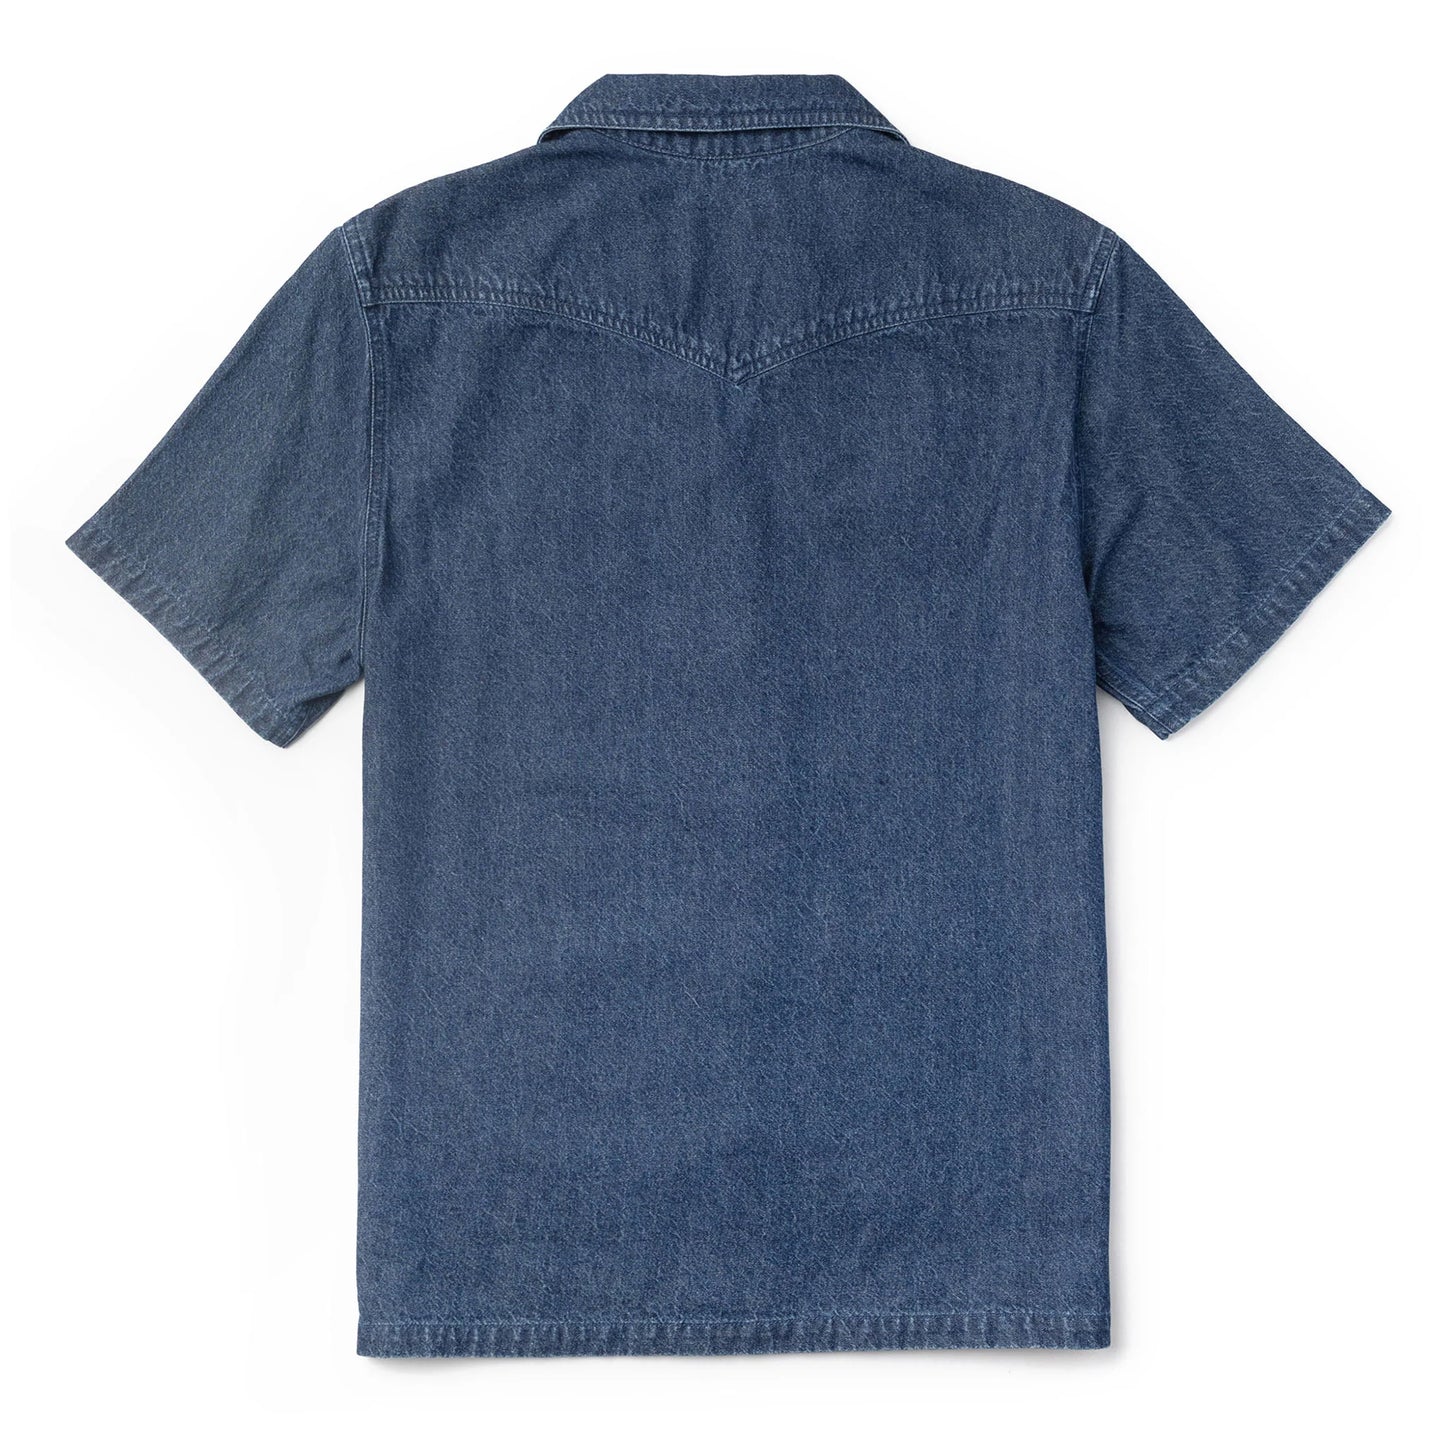 Back view of Seager's Southpaw Whippersnapper Shirt in the color Indigo